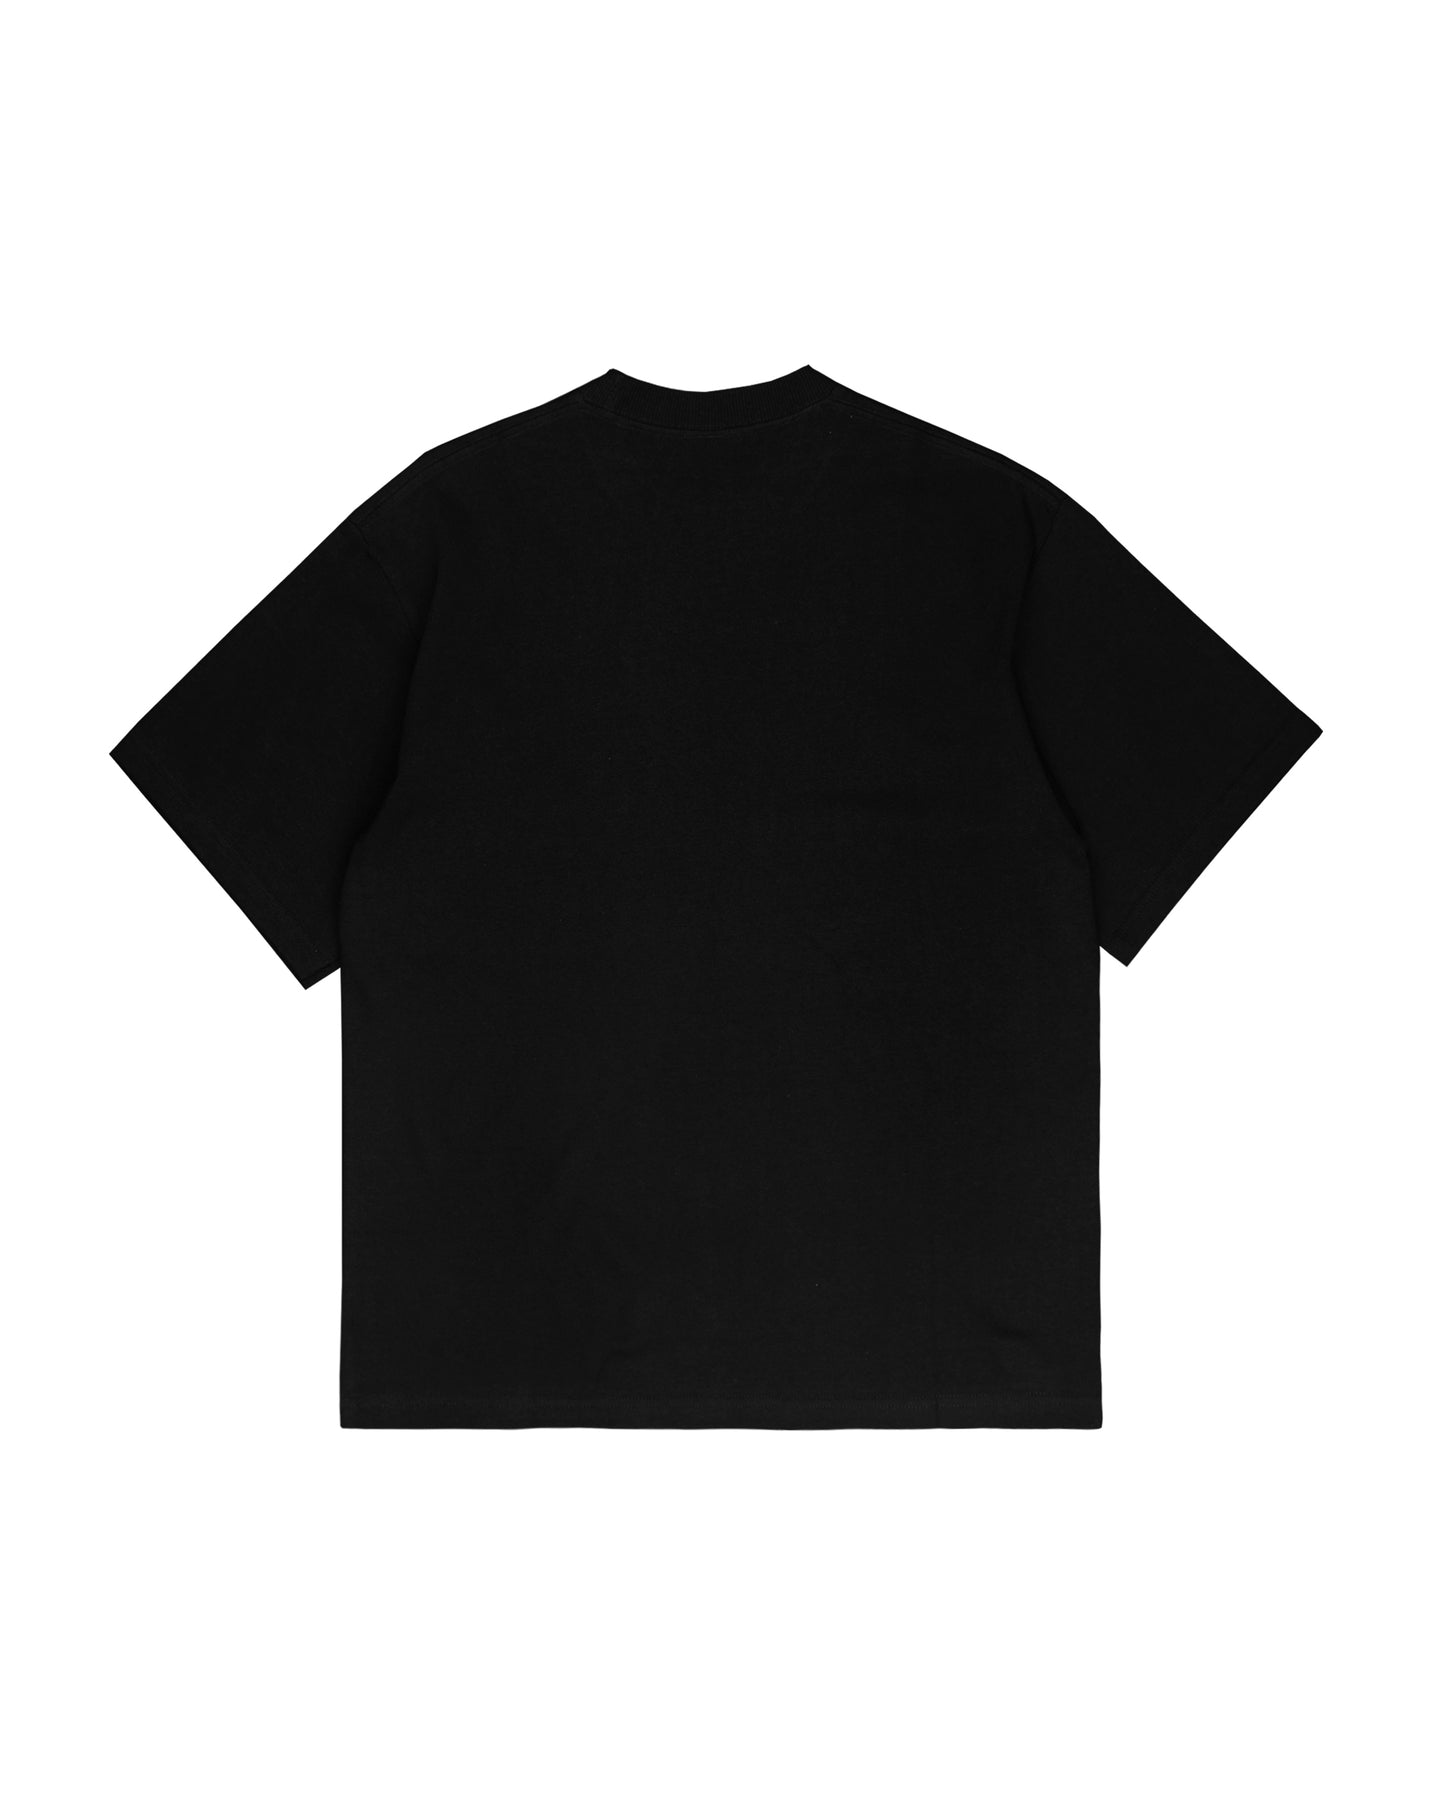 Palma Black Relaxed Fit Tees